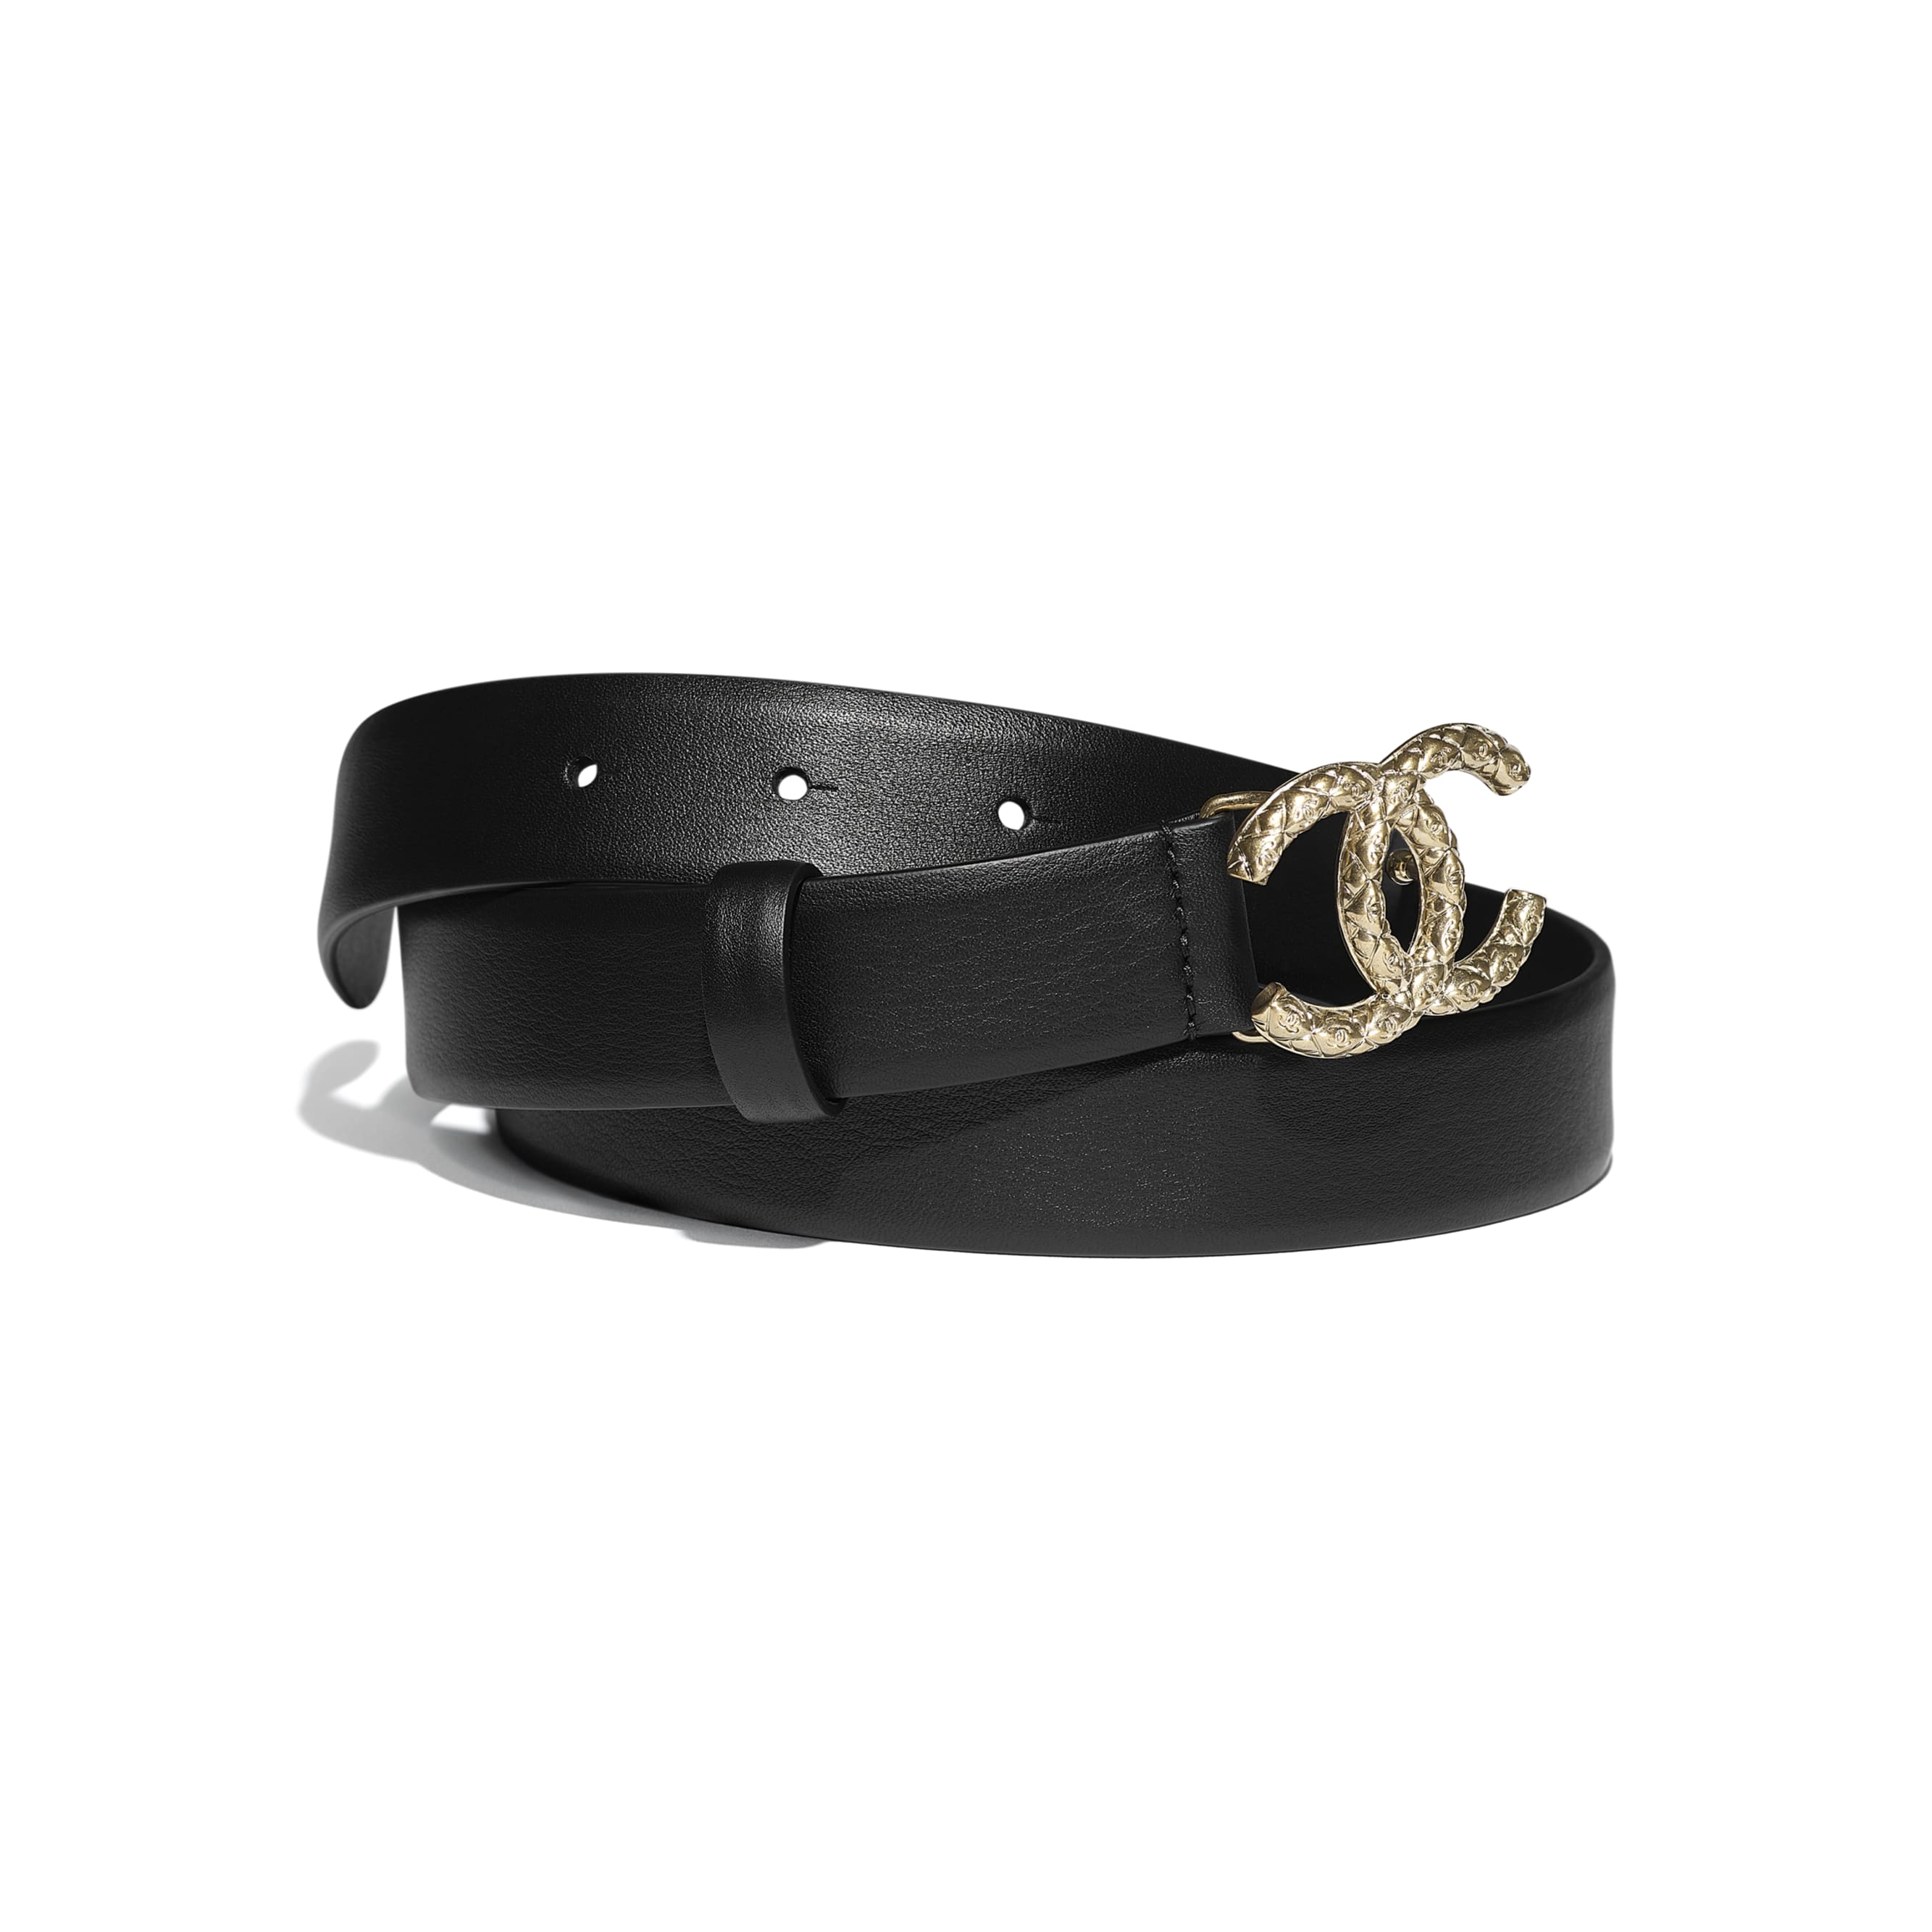 How Much Is Chanel? Chanel Price Guide how much is a chanel belt